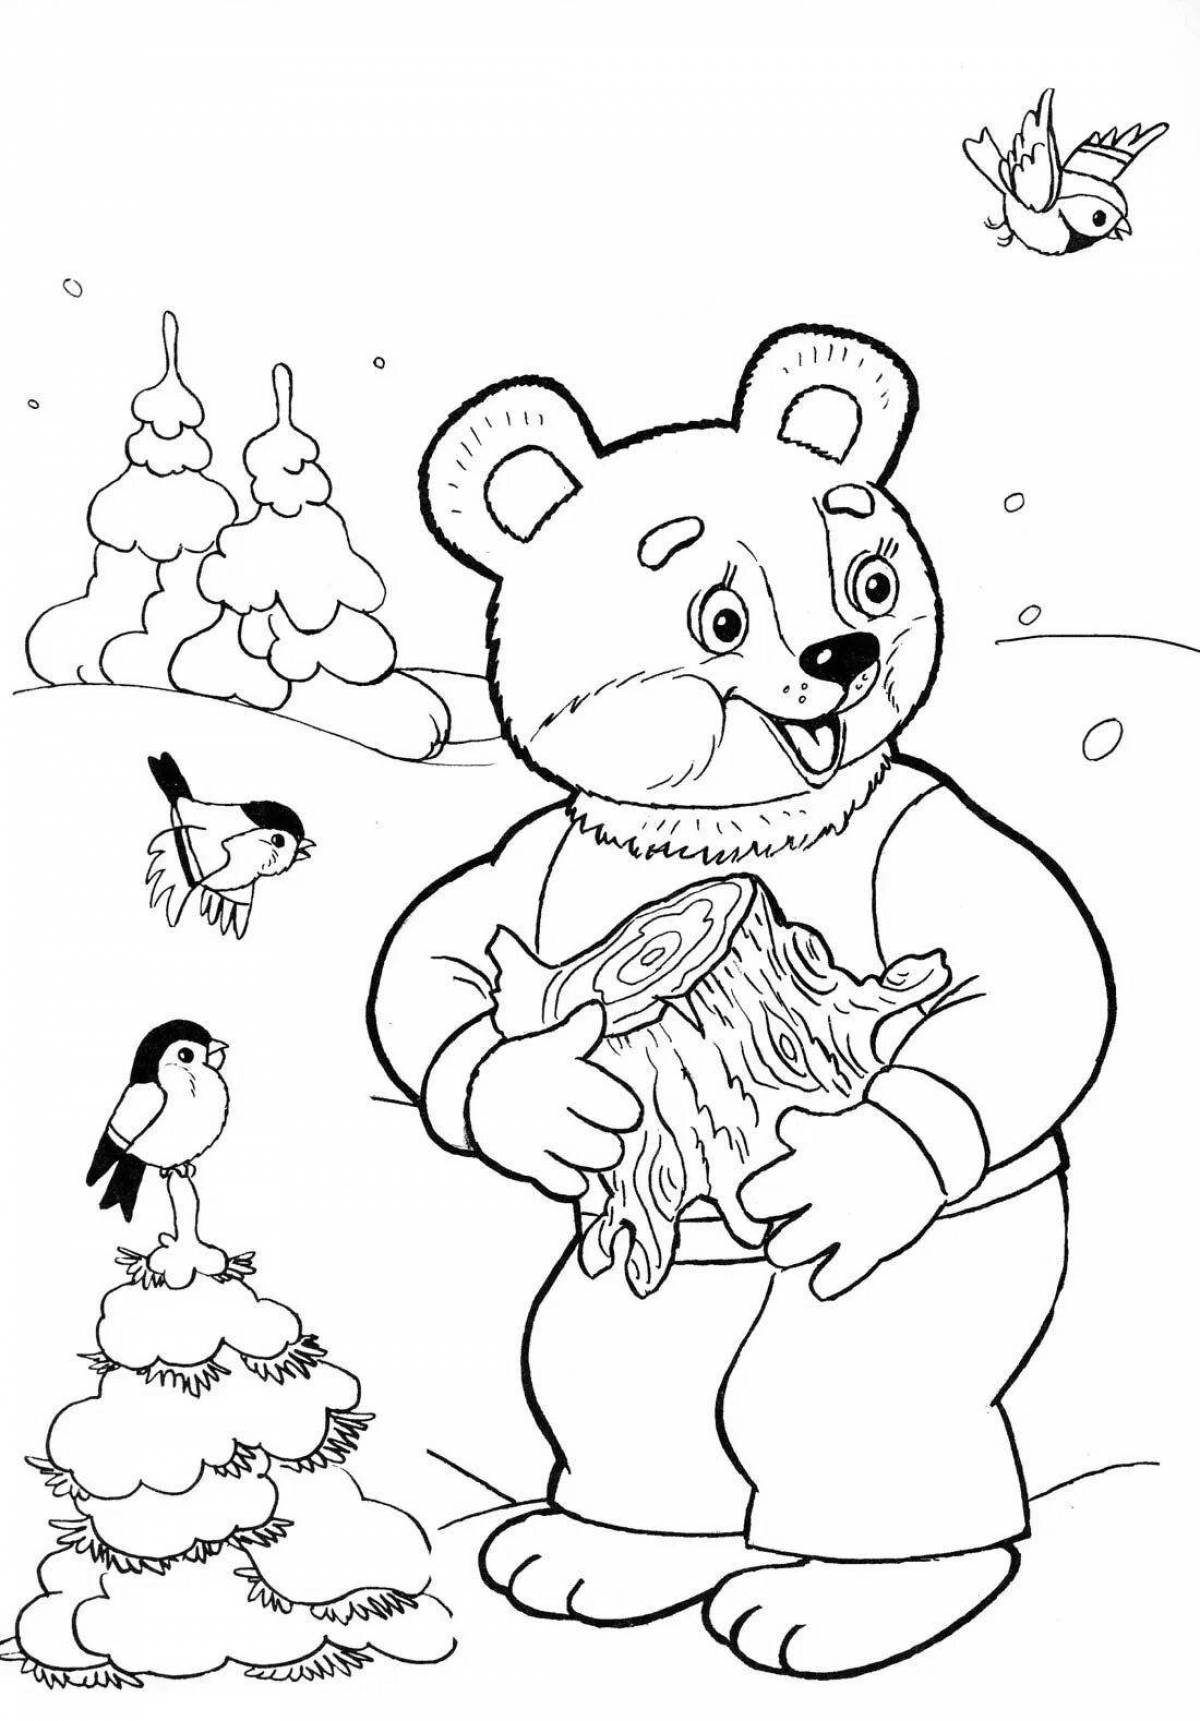 Exquisite fairy teddy bear coloring book